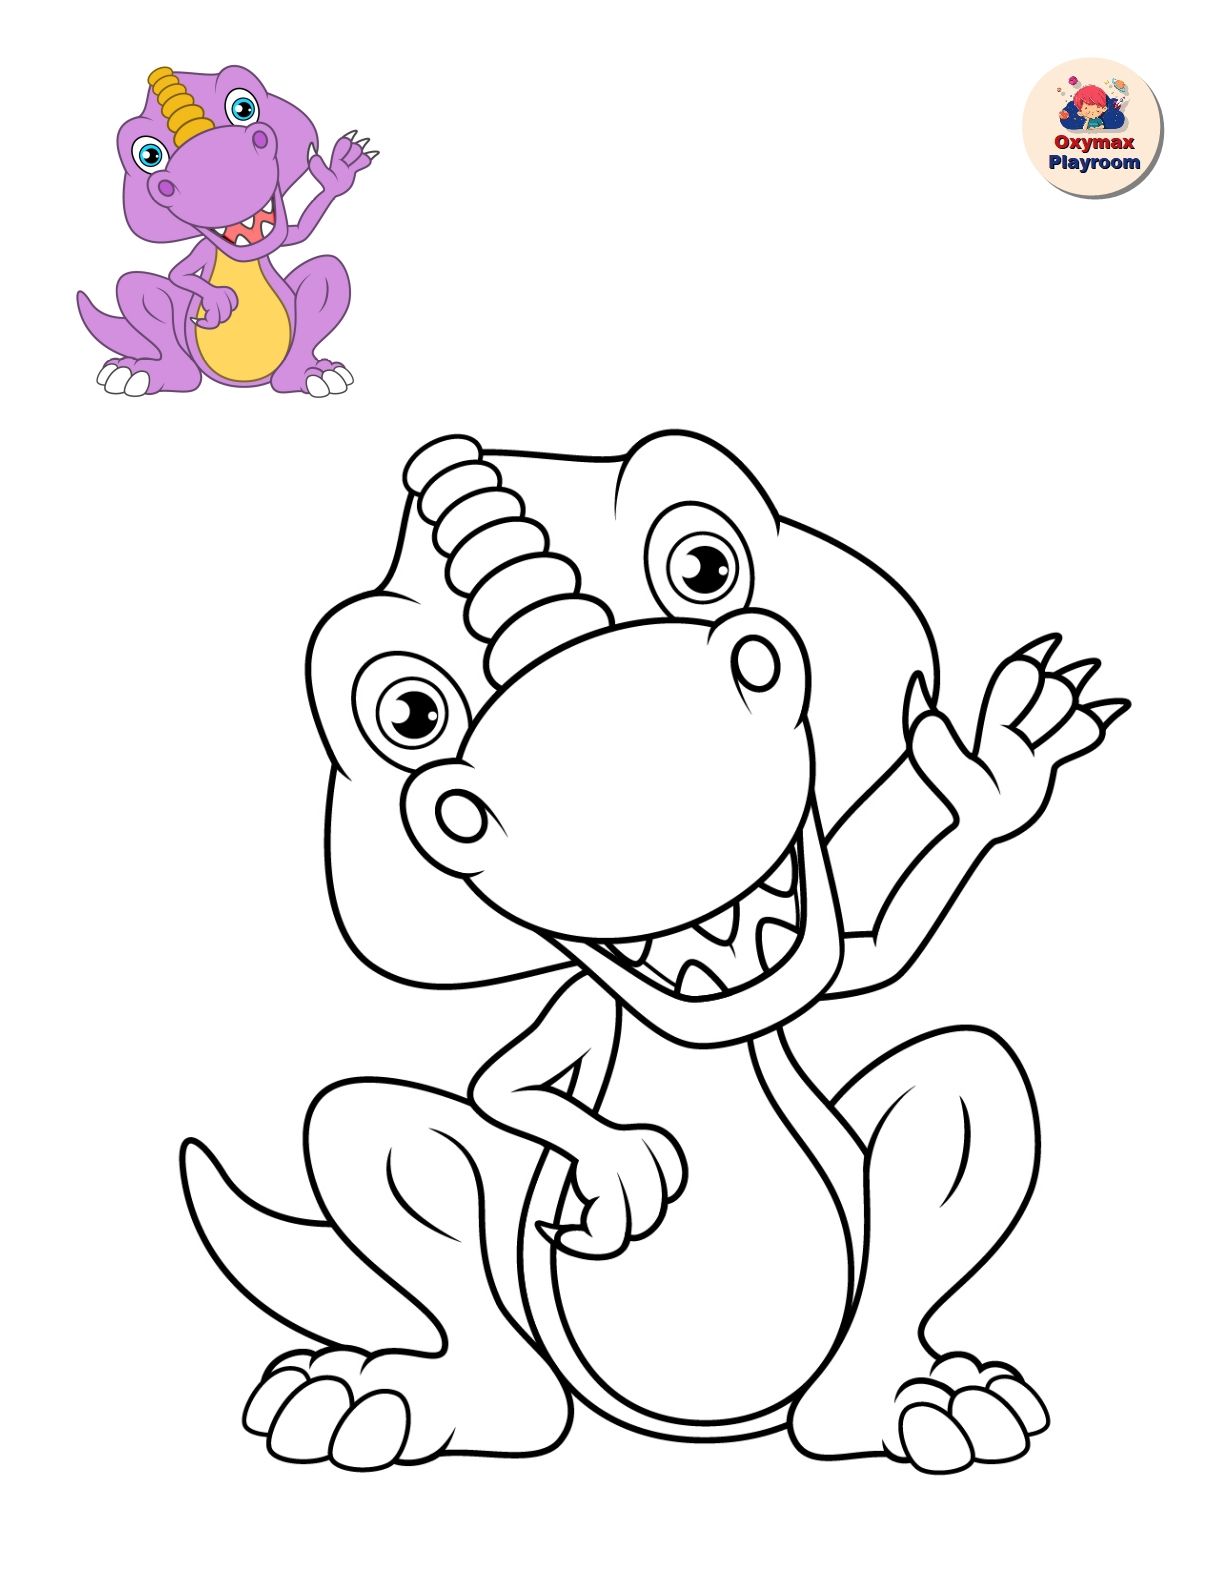 Coloring pages for children: "Dinosaurs"